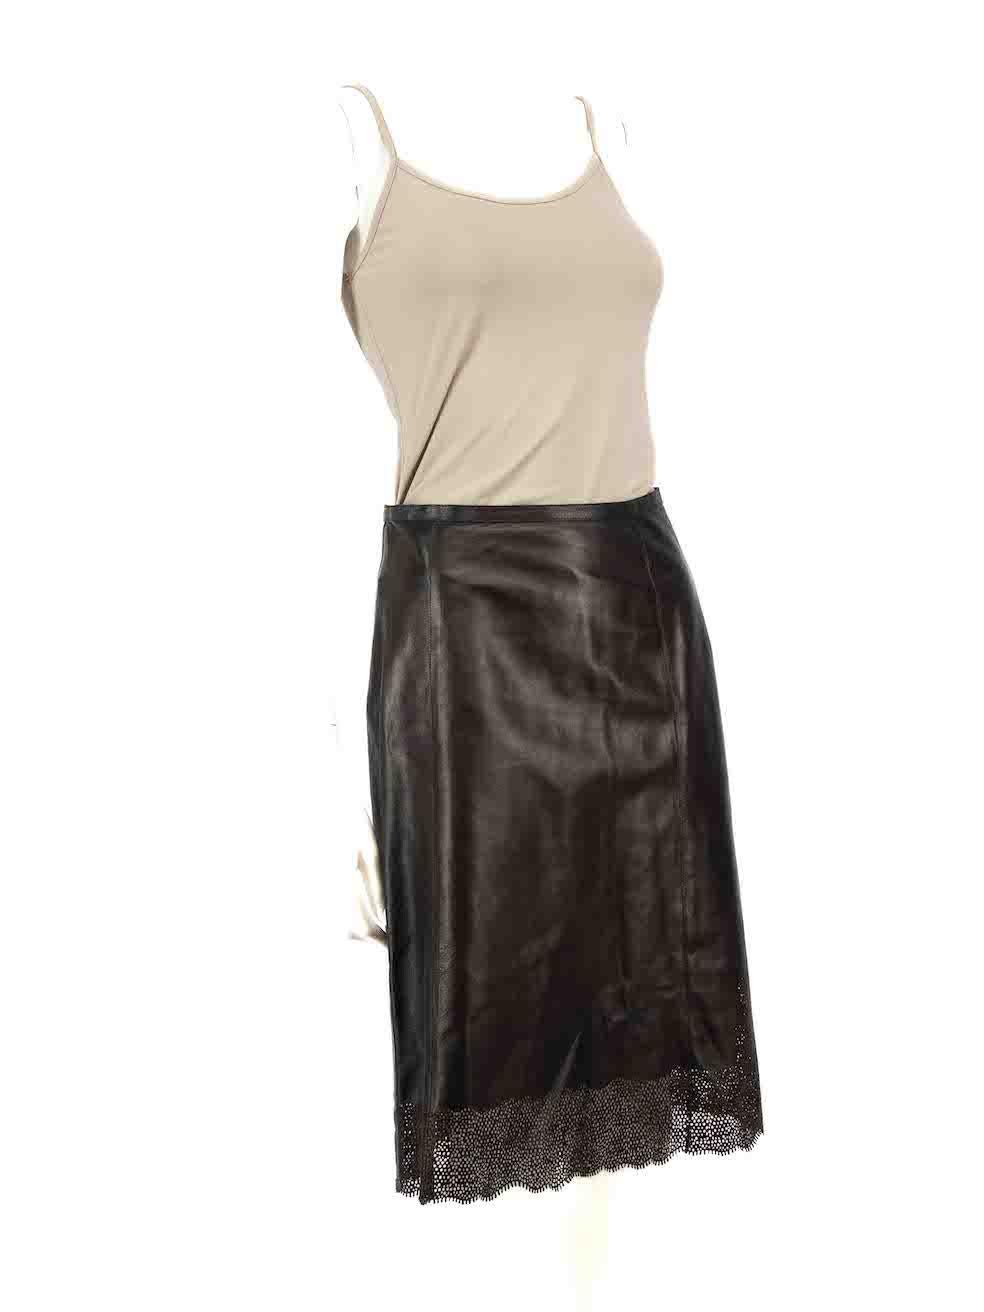 CONDITION is Very good. Hardly any visible wear to skirt is evident on this used Gucci designer resale item.
 
 
 
 Details
 
 
 Vintage
 
 Black
 
 Leather
 
 A-line skirt
 
 Knee length
 
 Perforated hem detail
 
 Side zip and snap button